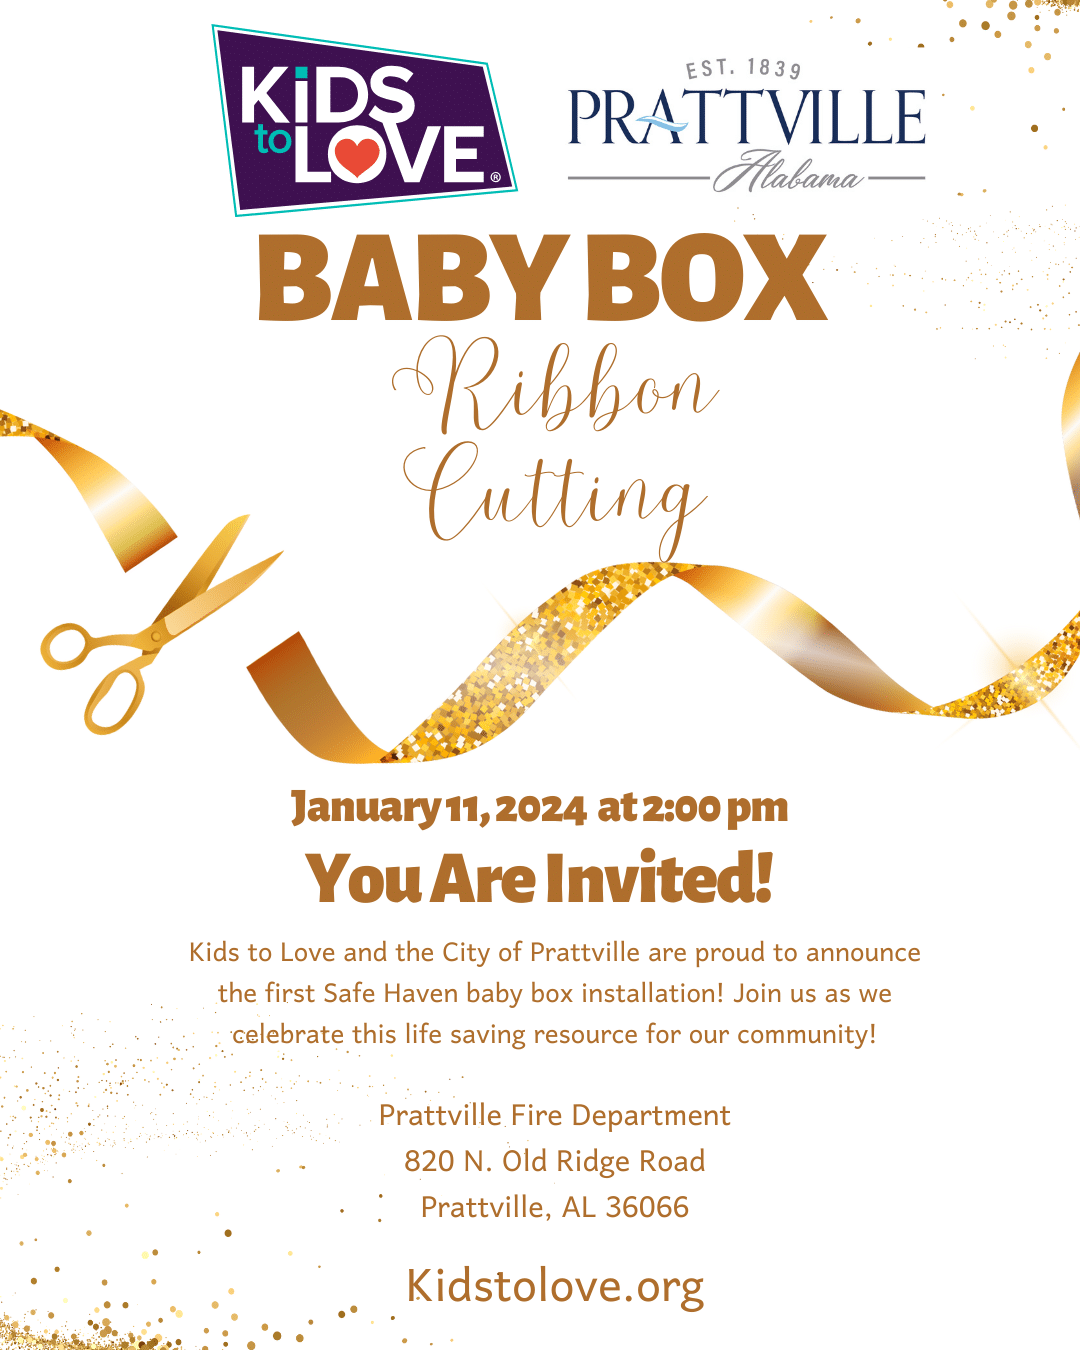 Safe Haven Baby Box opening in Prattville on January 11, 2024